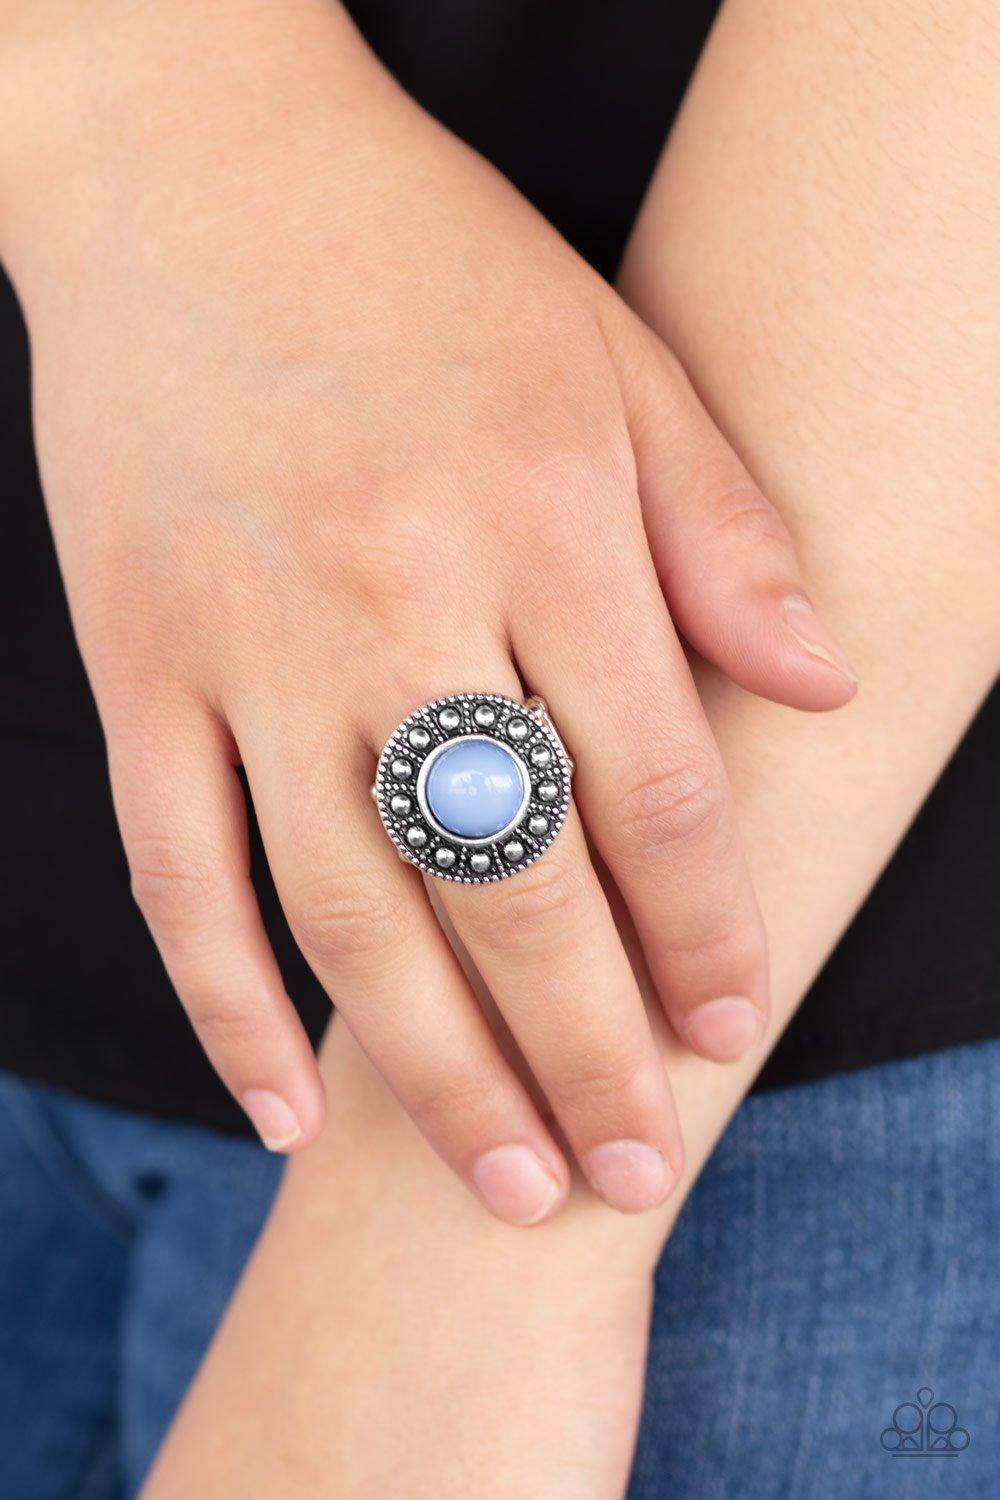 Treasure Chest Shimmer Blue Ring - Jewelry by Bretta